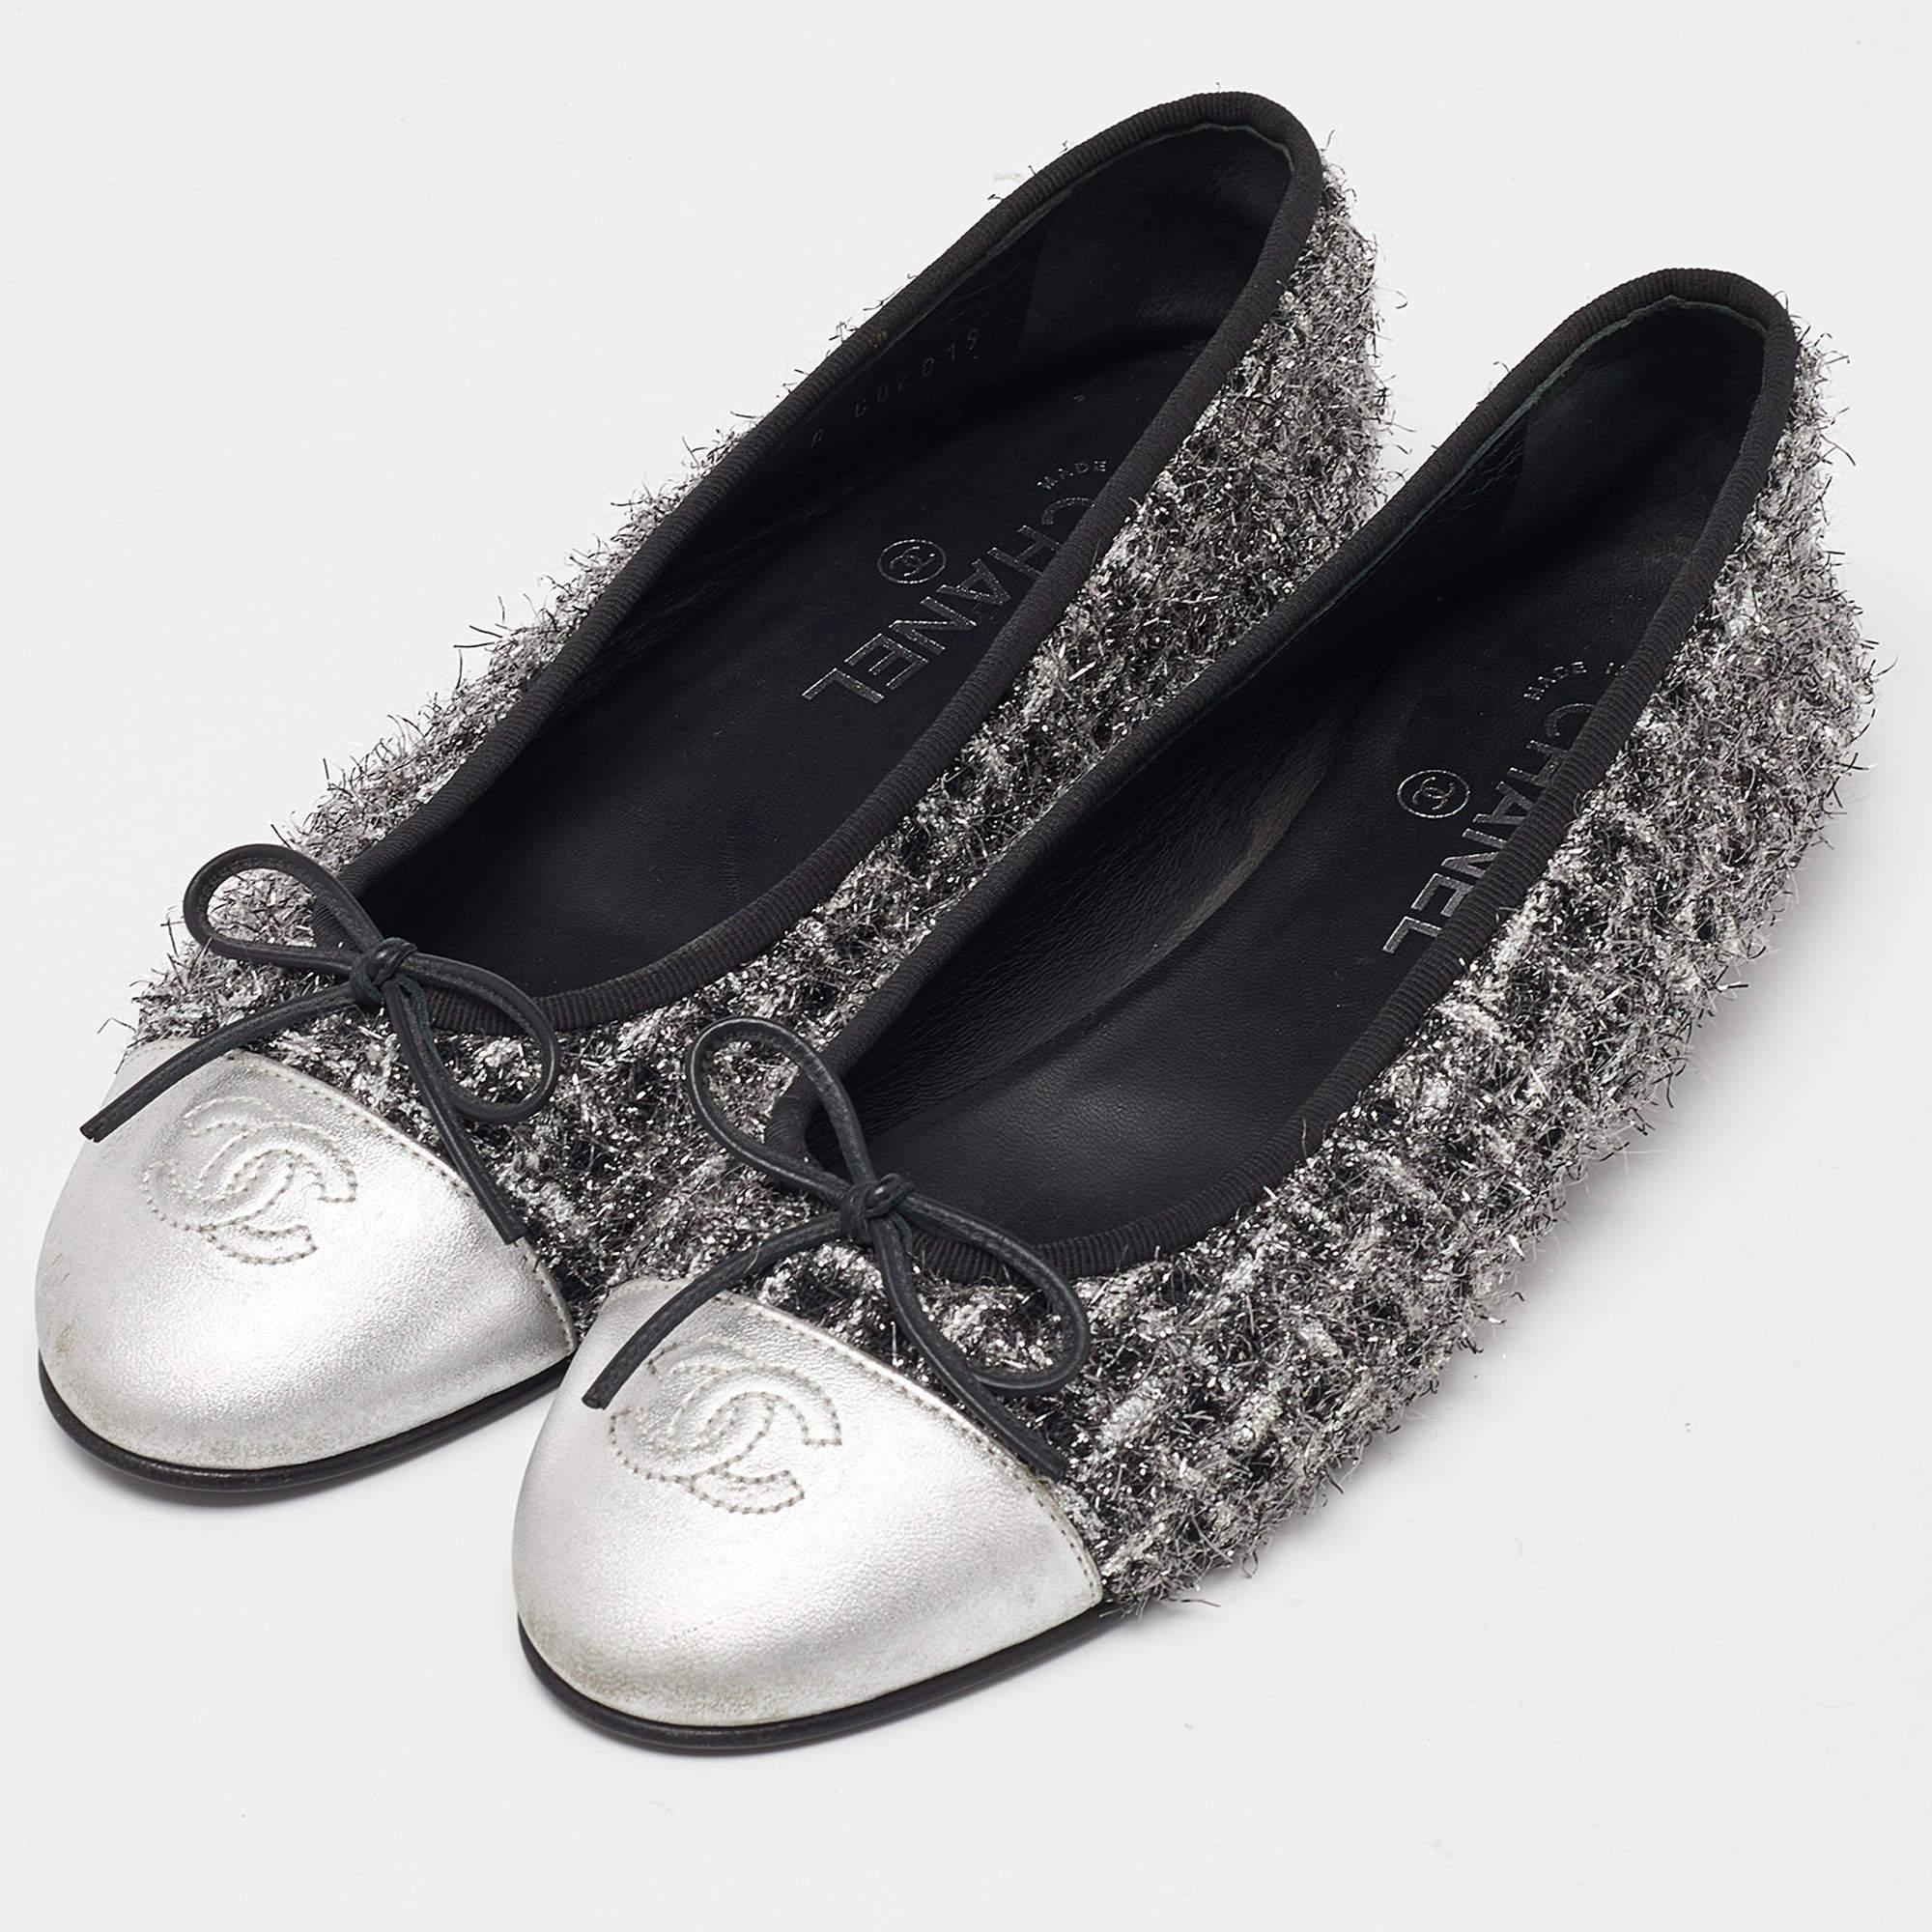 Chanel Black/Silver Tweed and Leather CC Ballet Flats Size 39 4